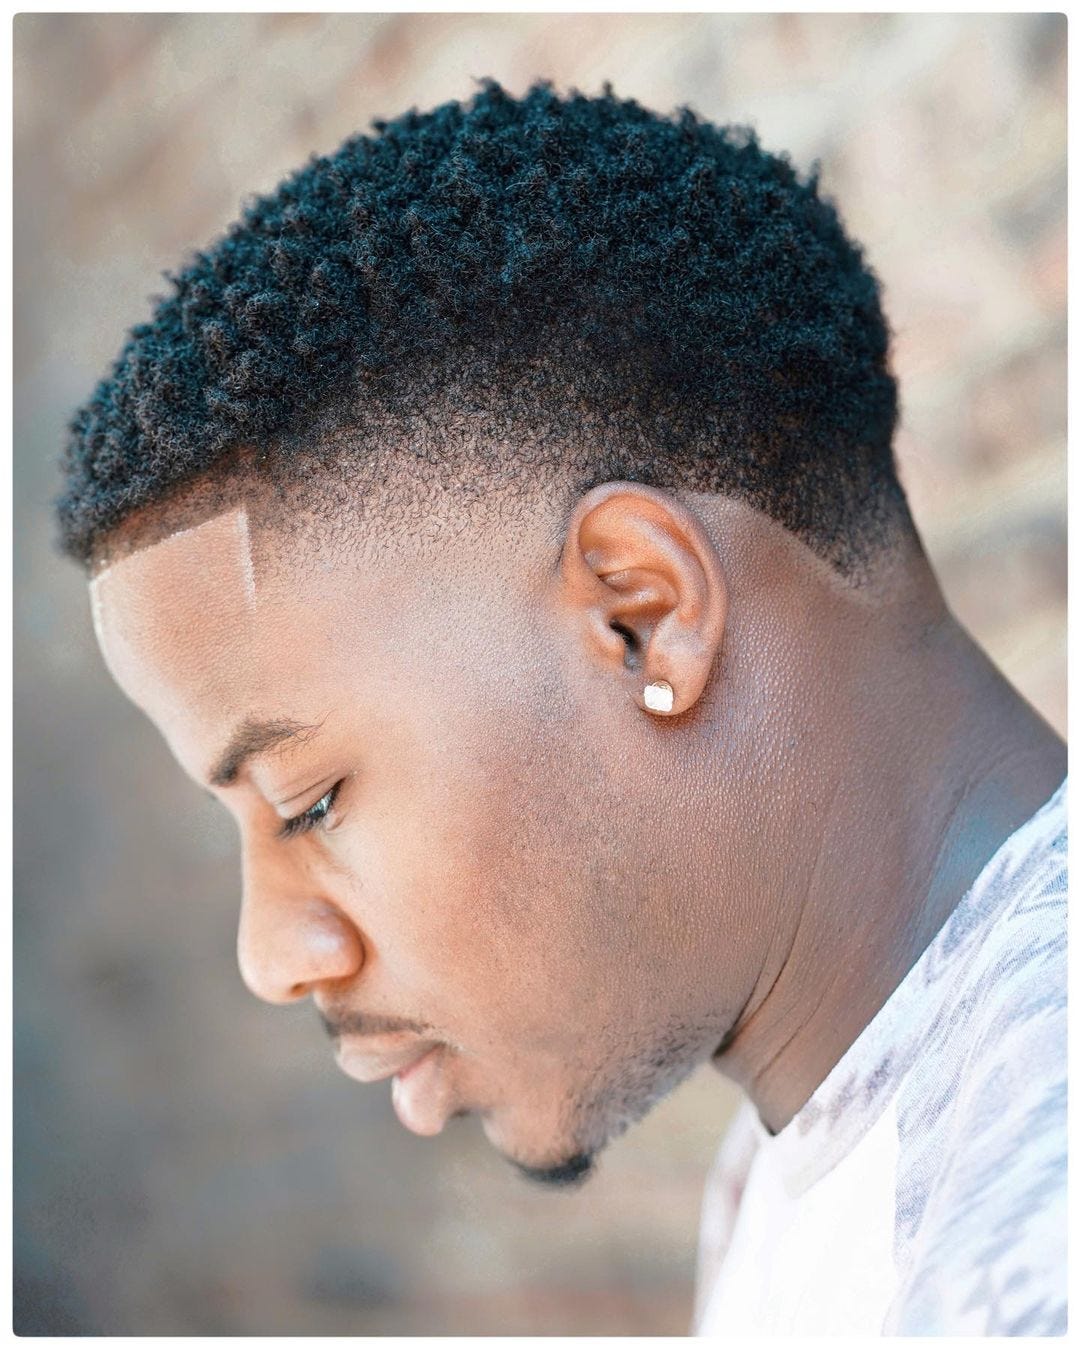 Taper fade haircuts never go out of style, they just get updated., by  Osairamofficial